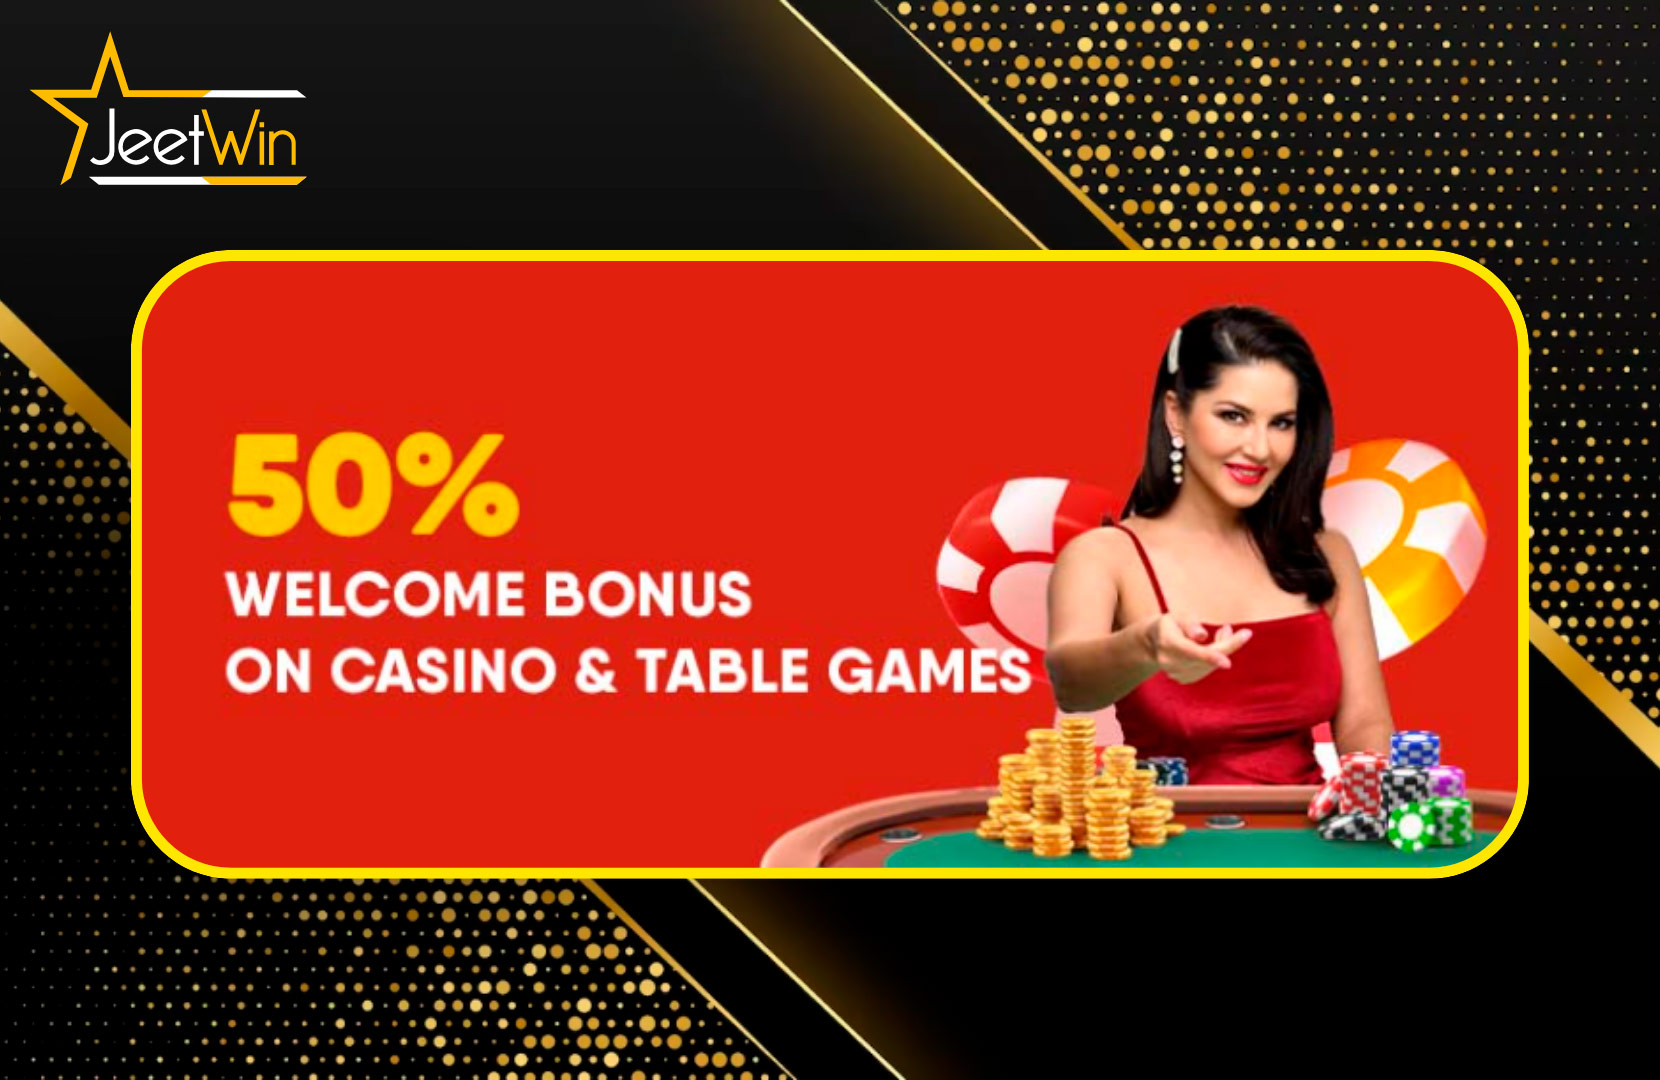 Claim Your Casino Bonuses at Jeetwin Pakistan and Get Rewarded